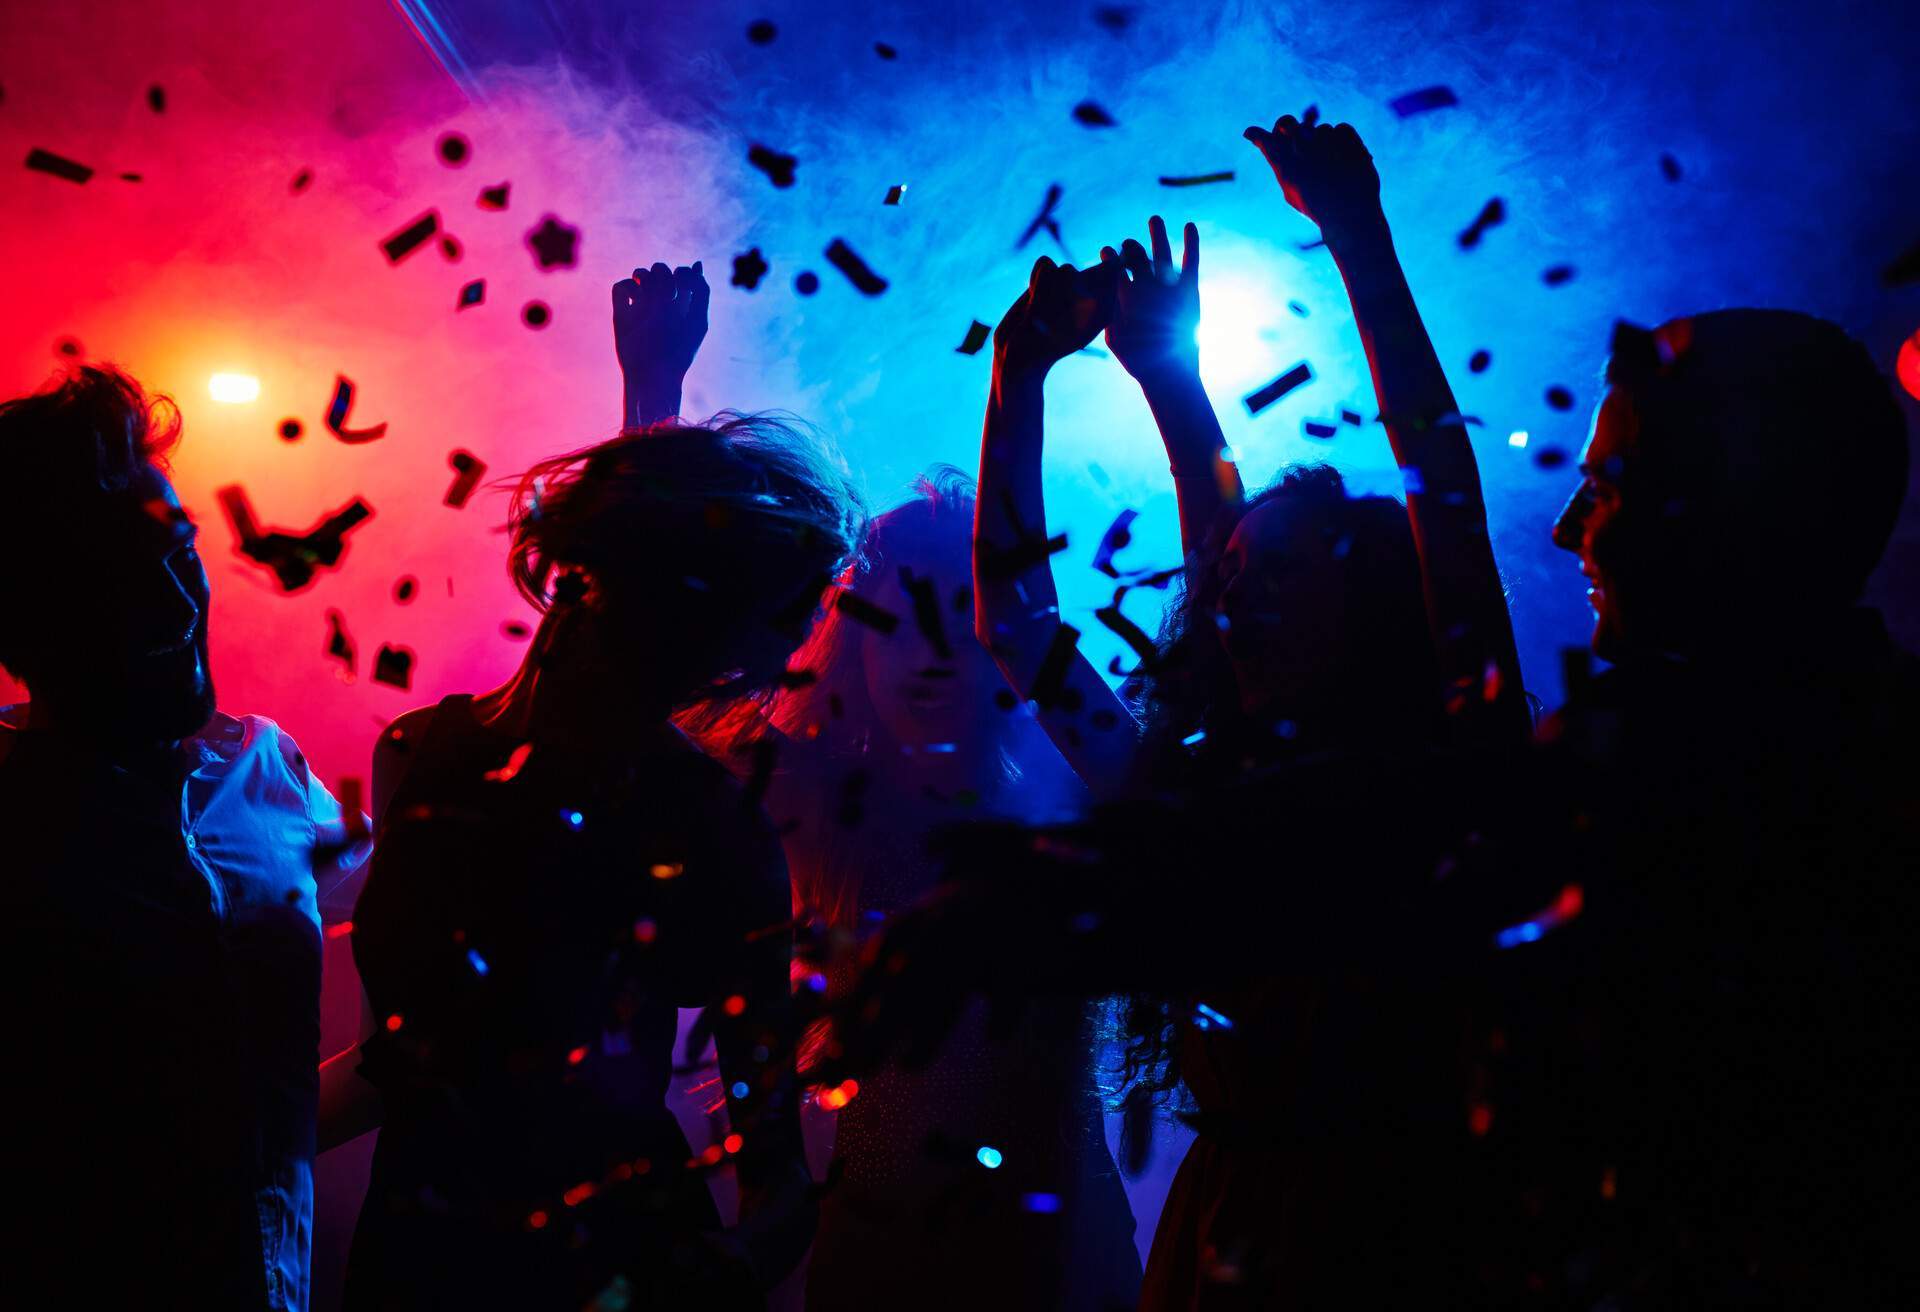 Silhouette of people dancing with their hands in the air against the colourful lights and confetti.